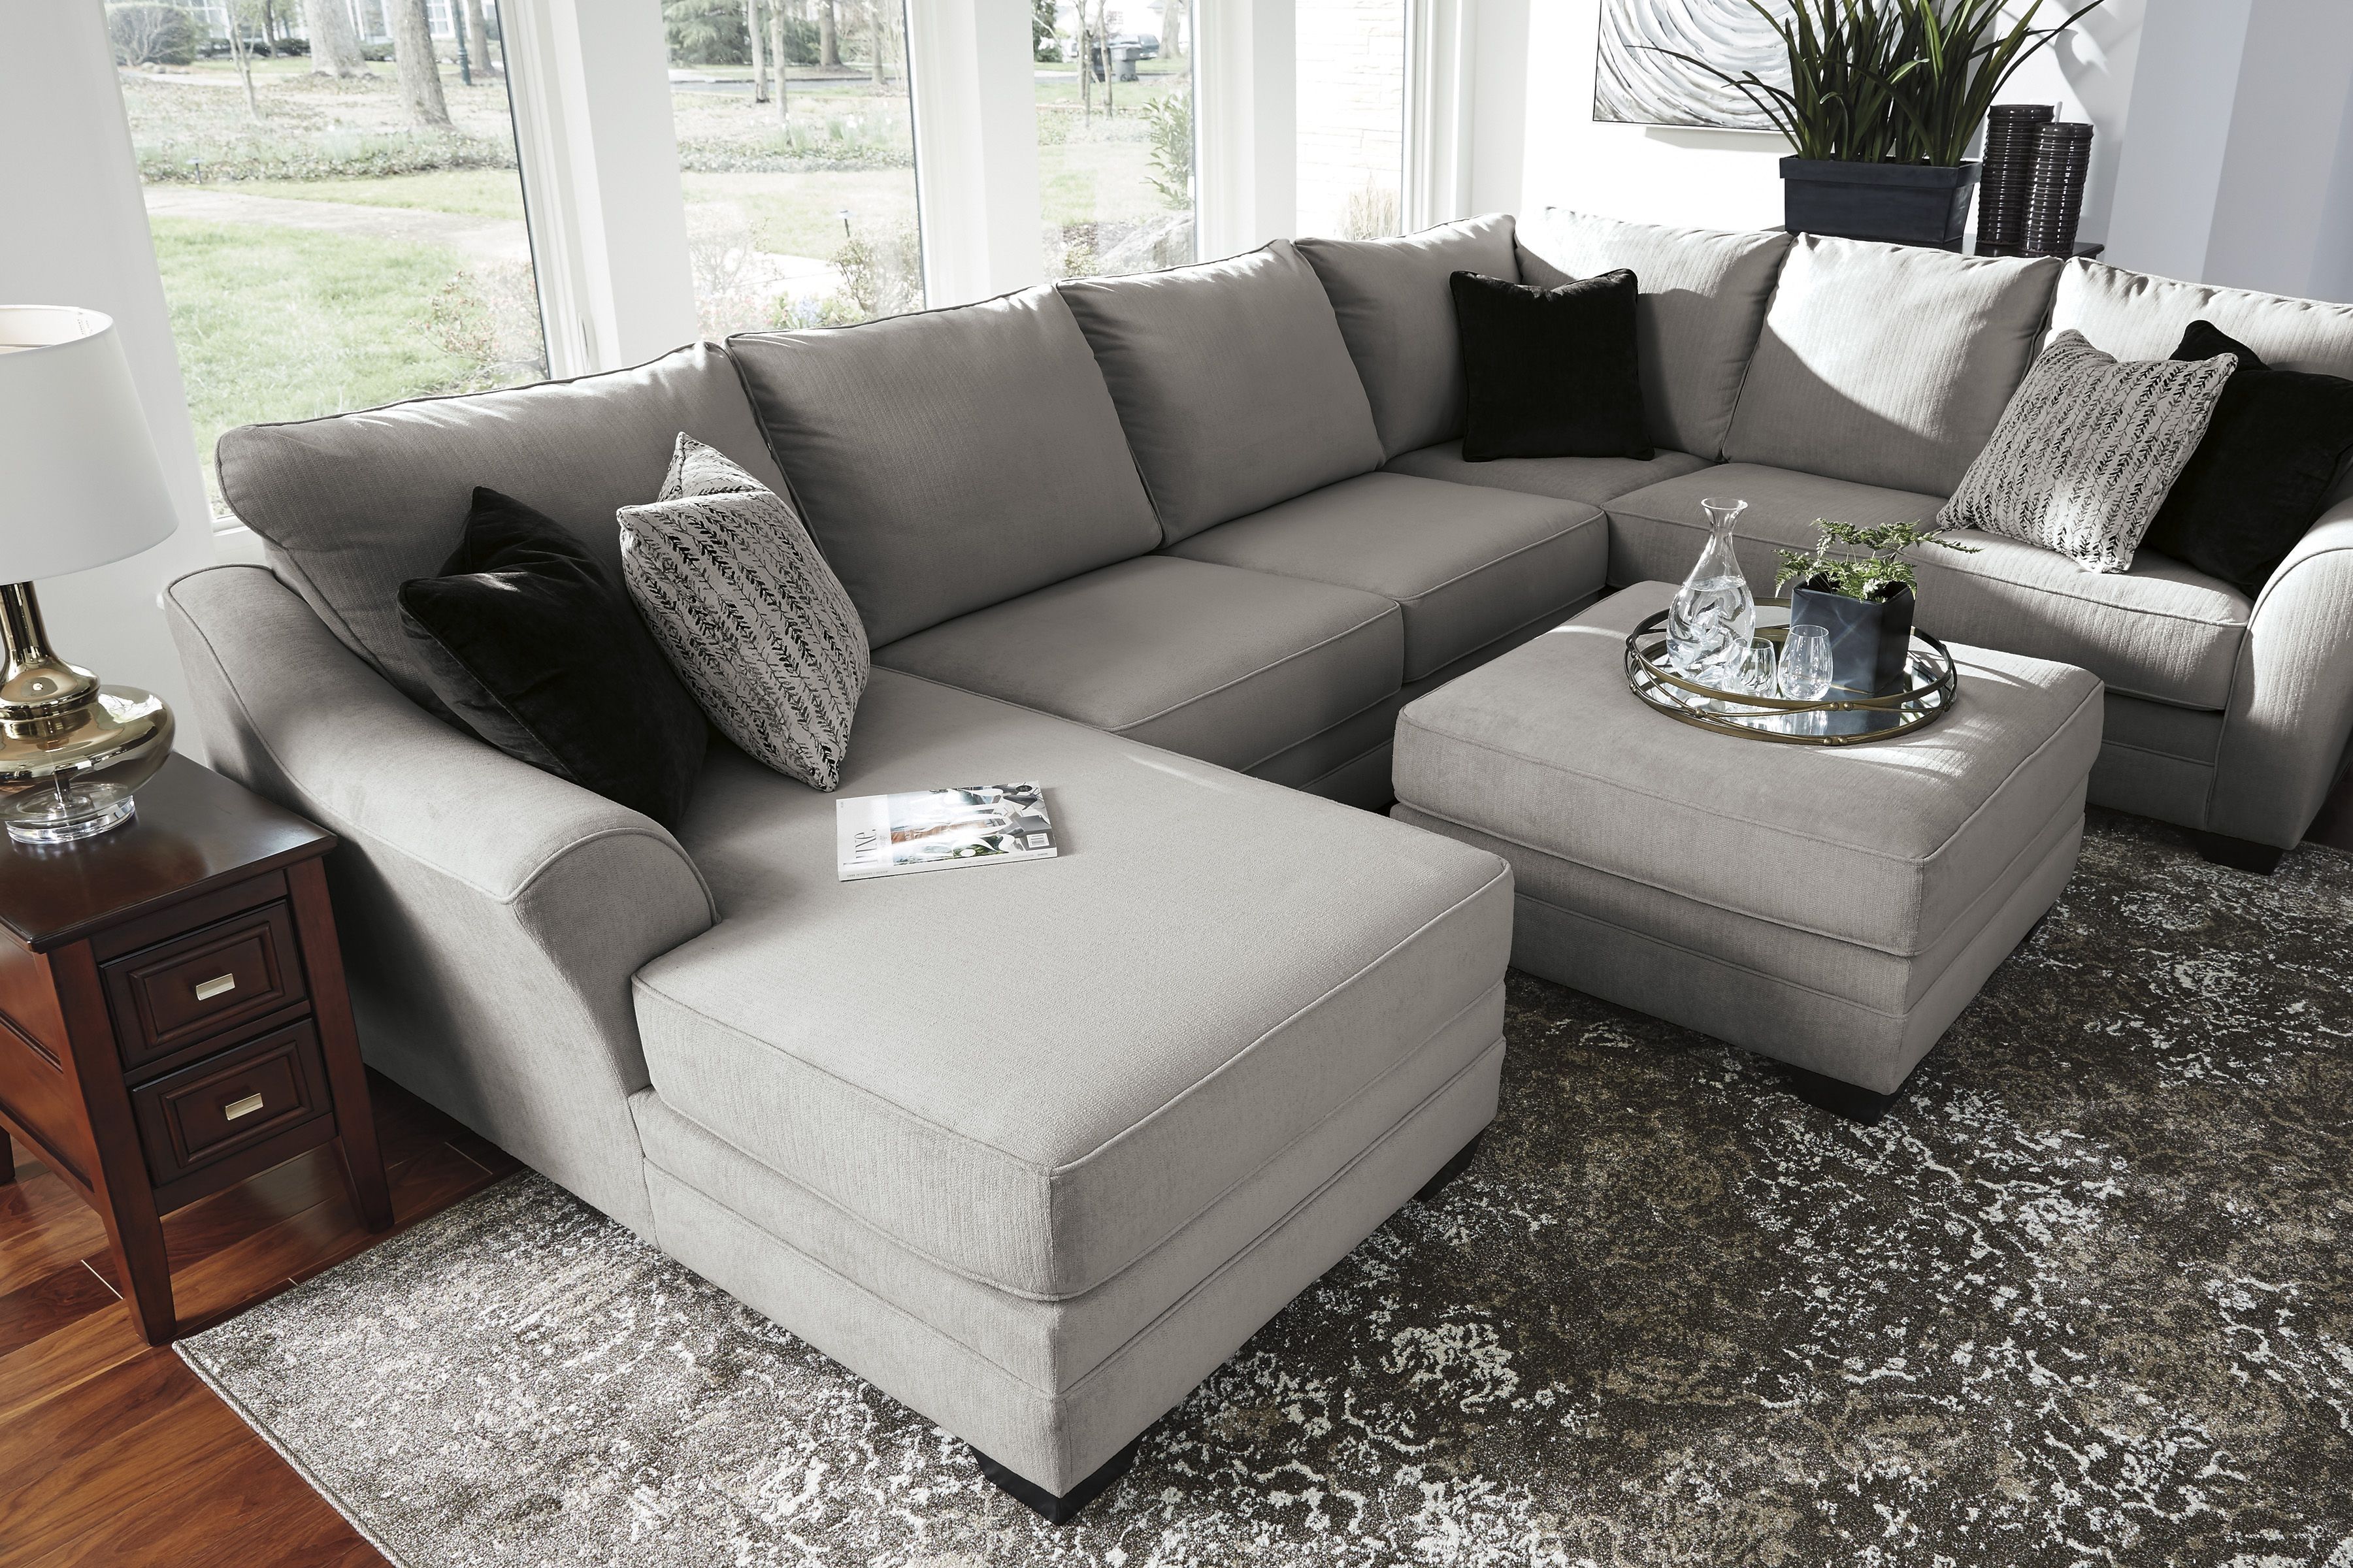 Palempor 3 Piece Laf Sectional In 2018 | Home Is Where The Heart Is Regarding Karen 3 Piece Sectionals (View 3 of 25)